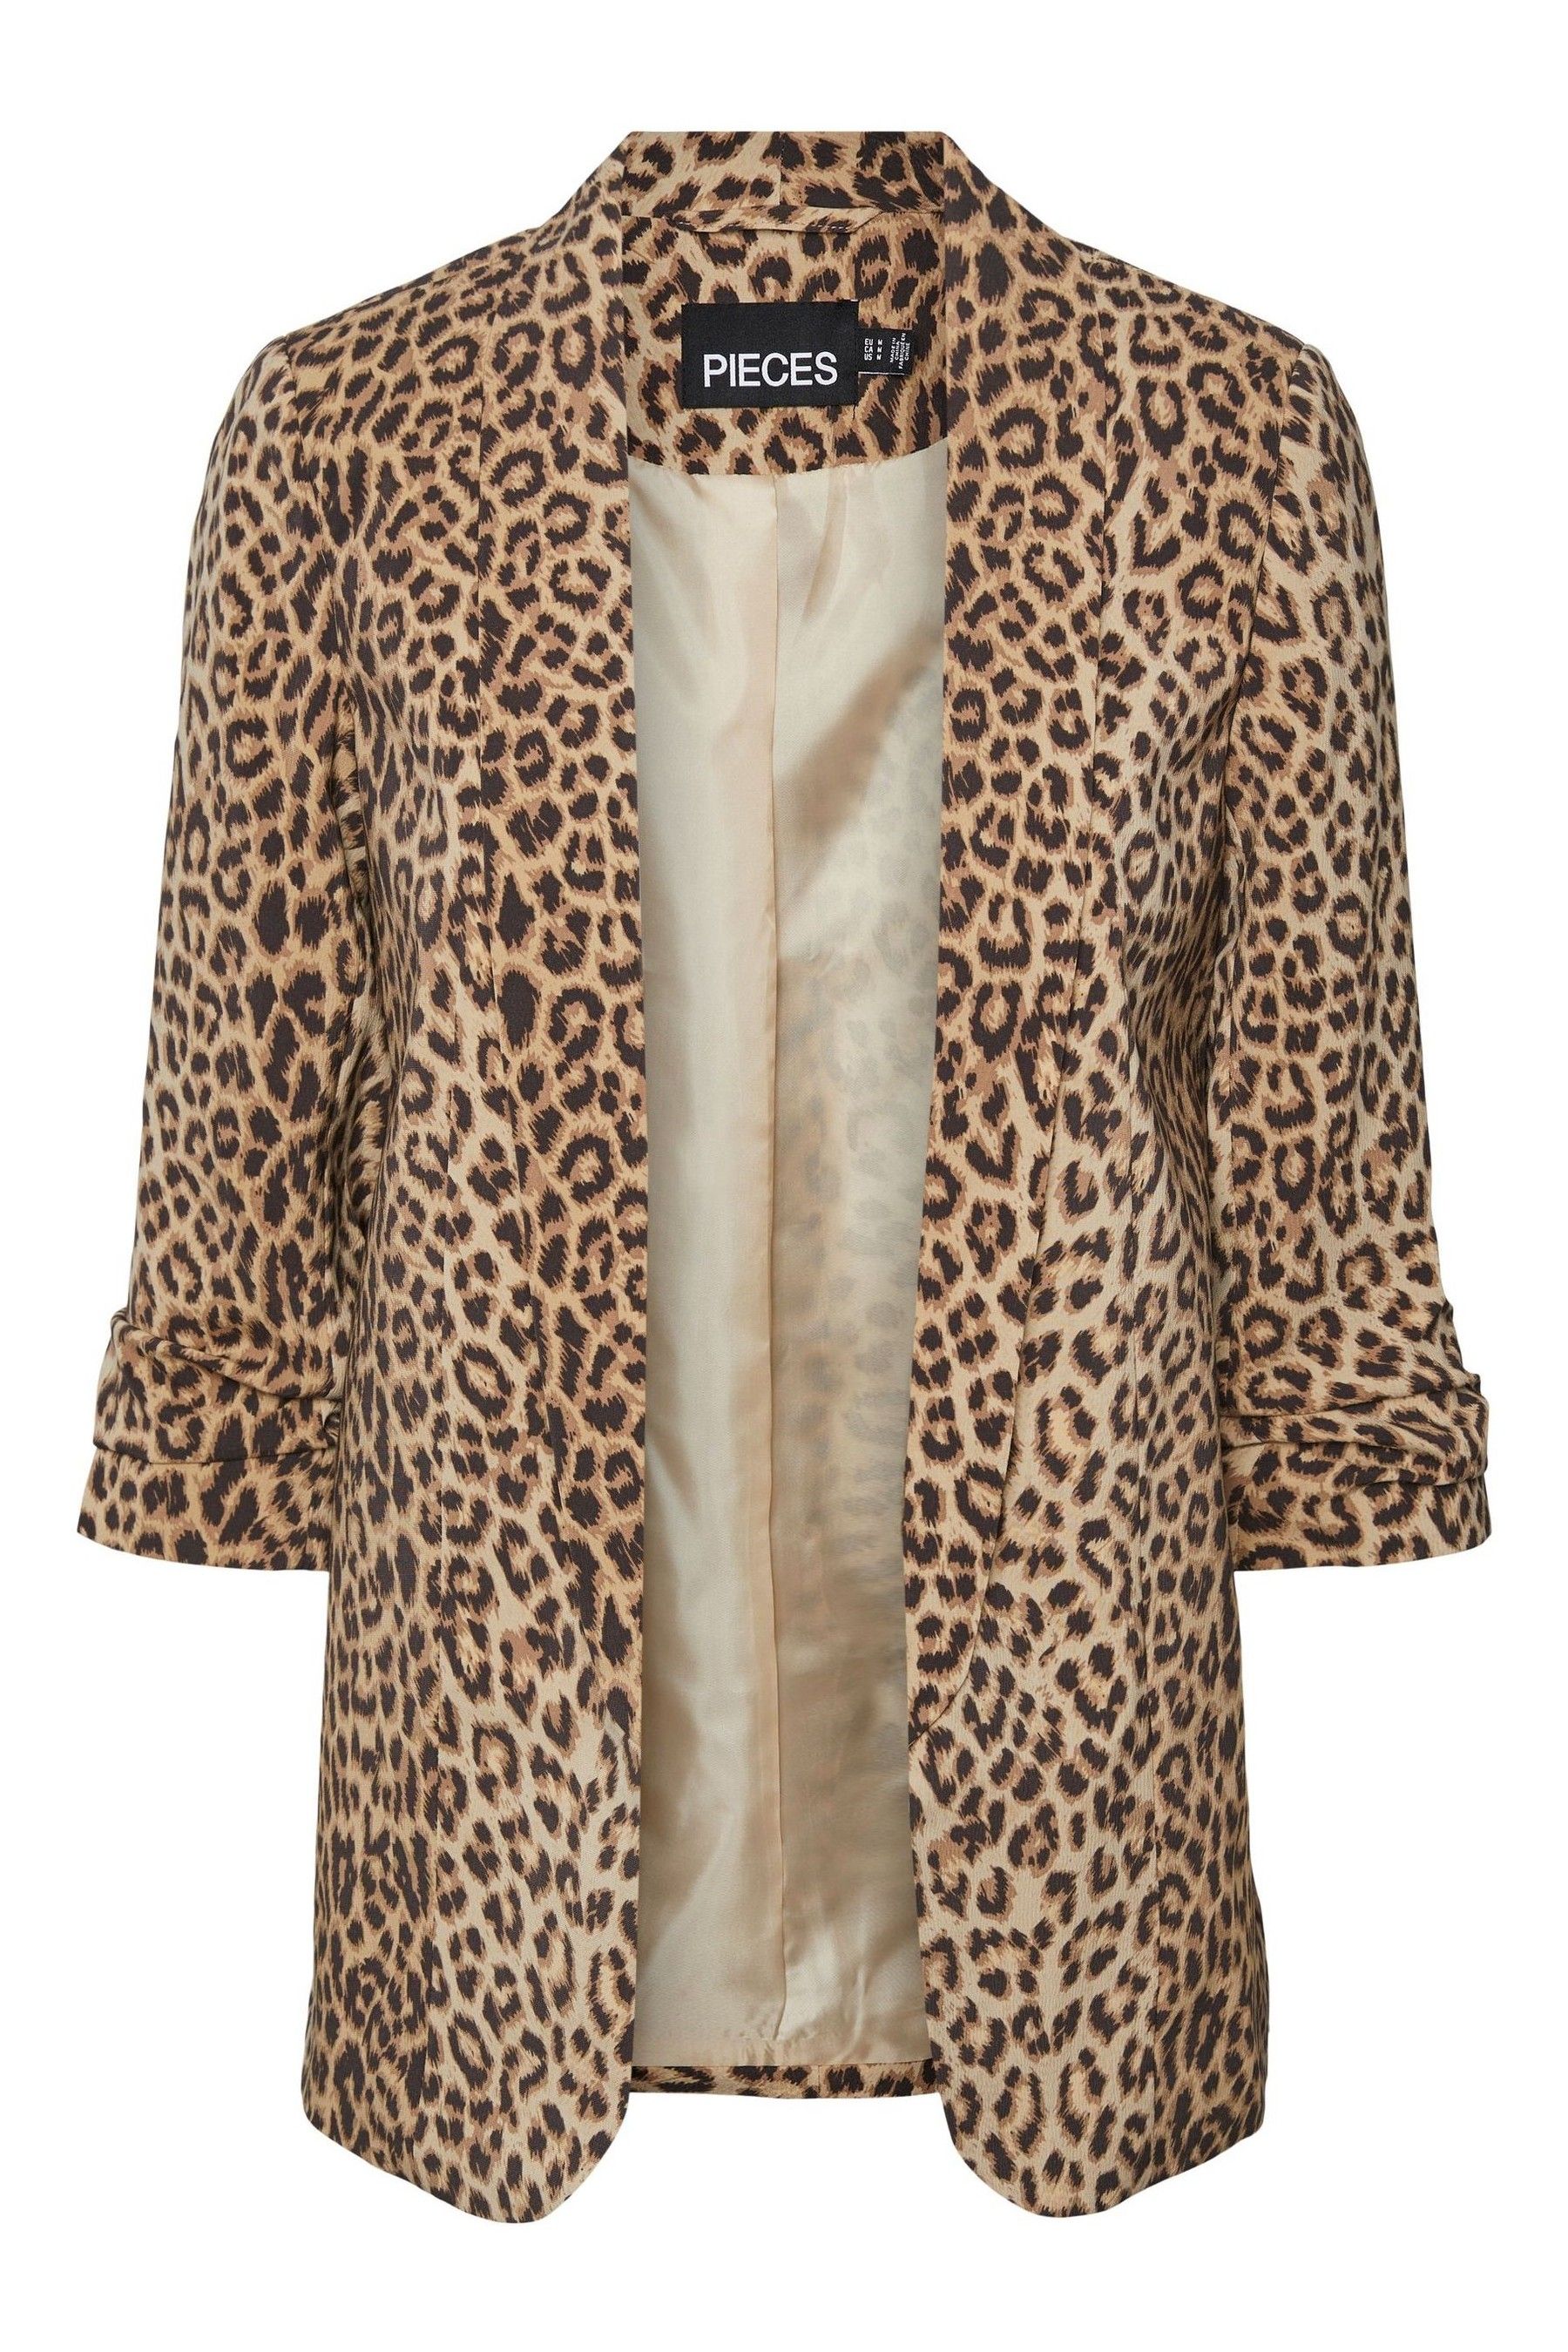 Buy Pieces Leopard Print Relaxed Ruched Sleeve Workwear Blazer from the ...